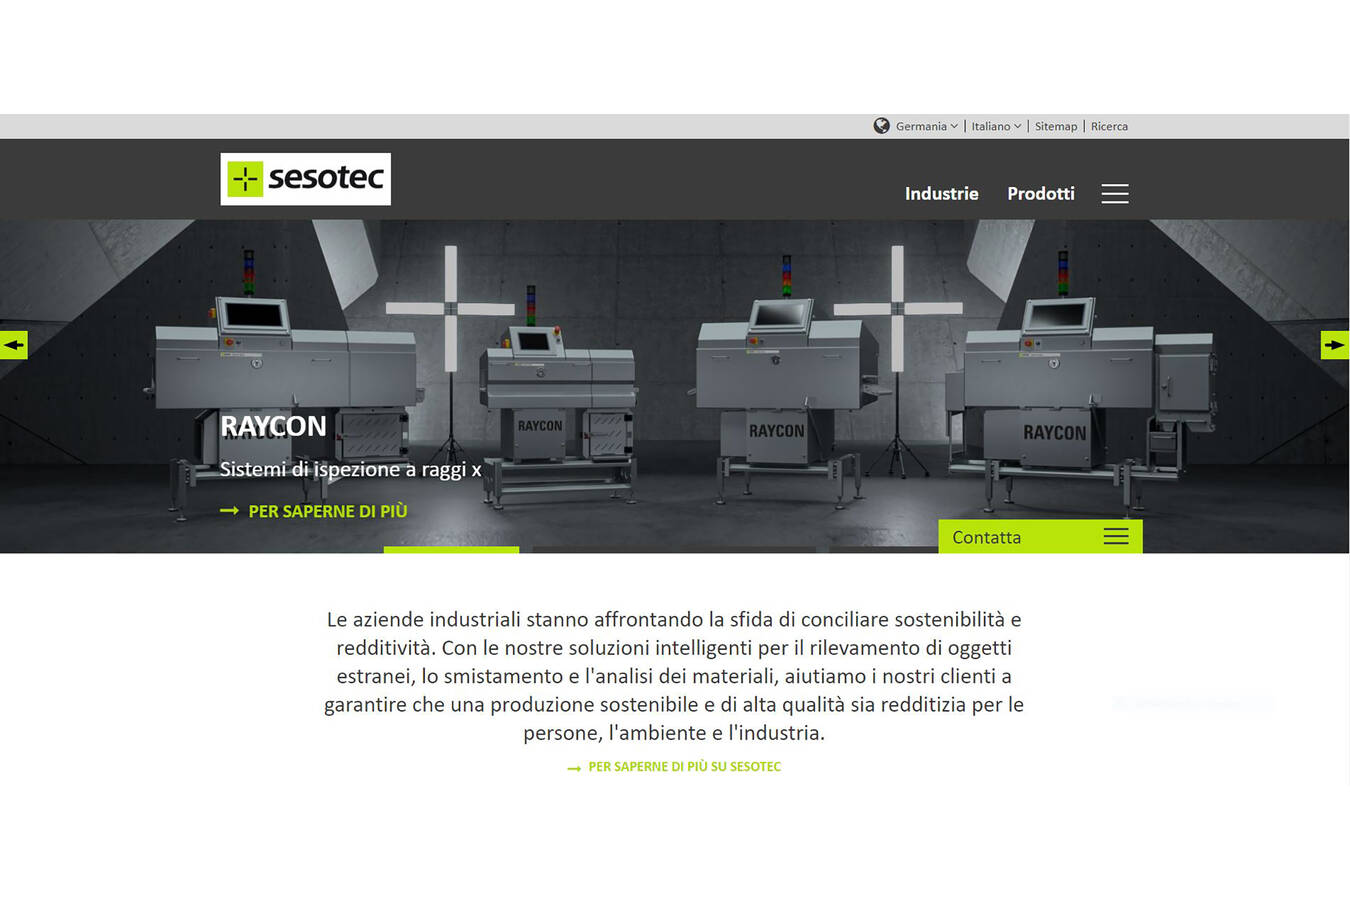 The home page of Sesotec’s Italian website with RAYCON motif (Photo: Sesotec GmbH)